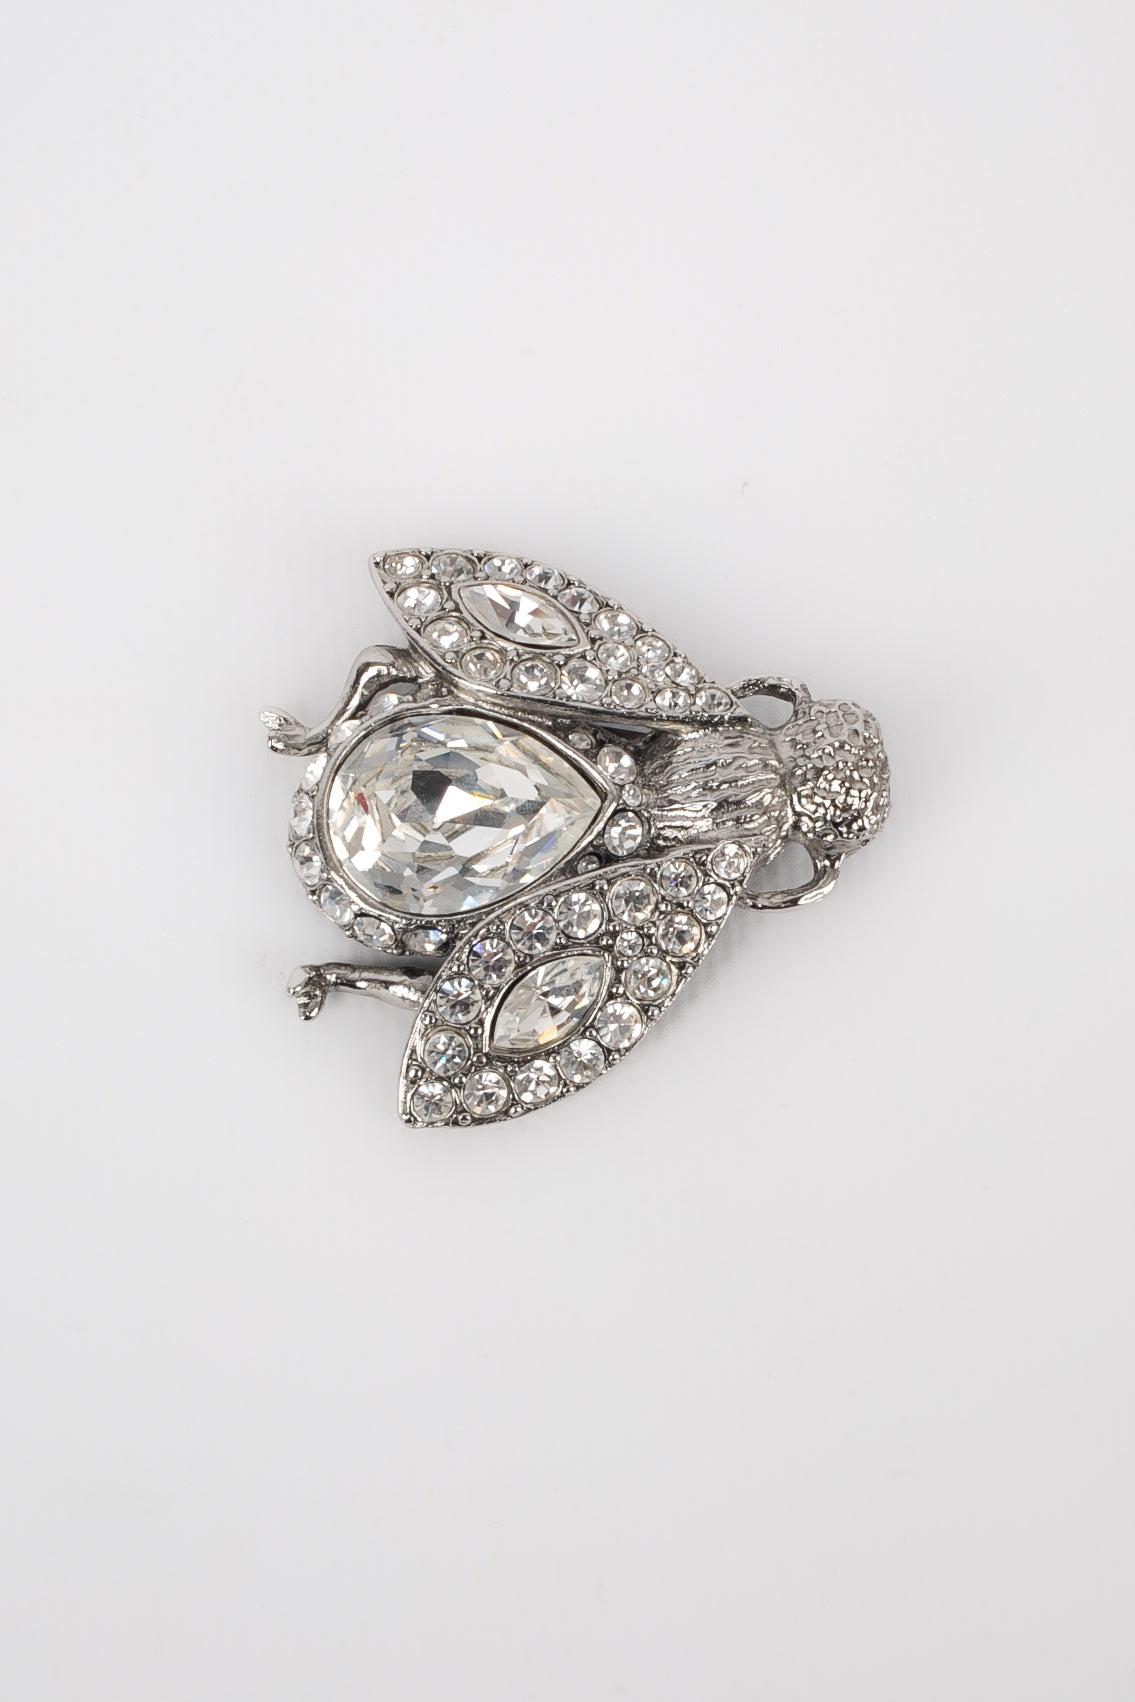 Dior - (Made in France) Silvery metal brooch with rhinestones representing a bee.
 
 Additional information: 
 Condition: Very good condition
 Dimensions: 4 cm x 4.5 cm
 
 Seller Reference: BR48
